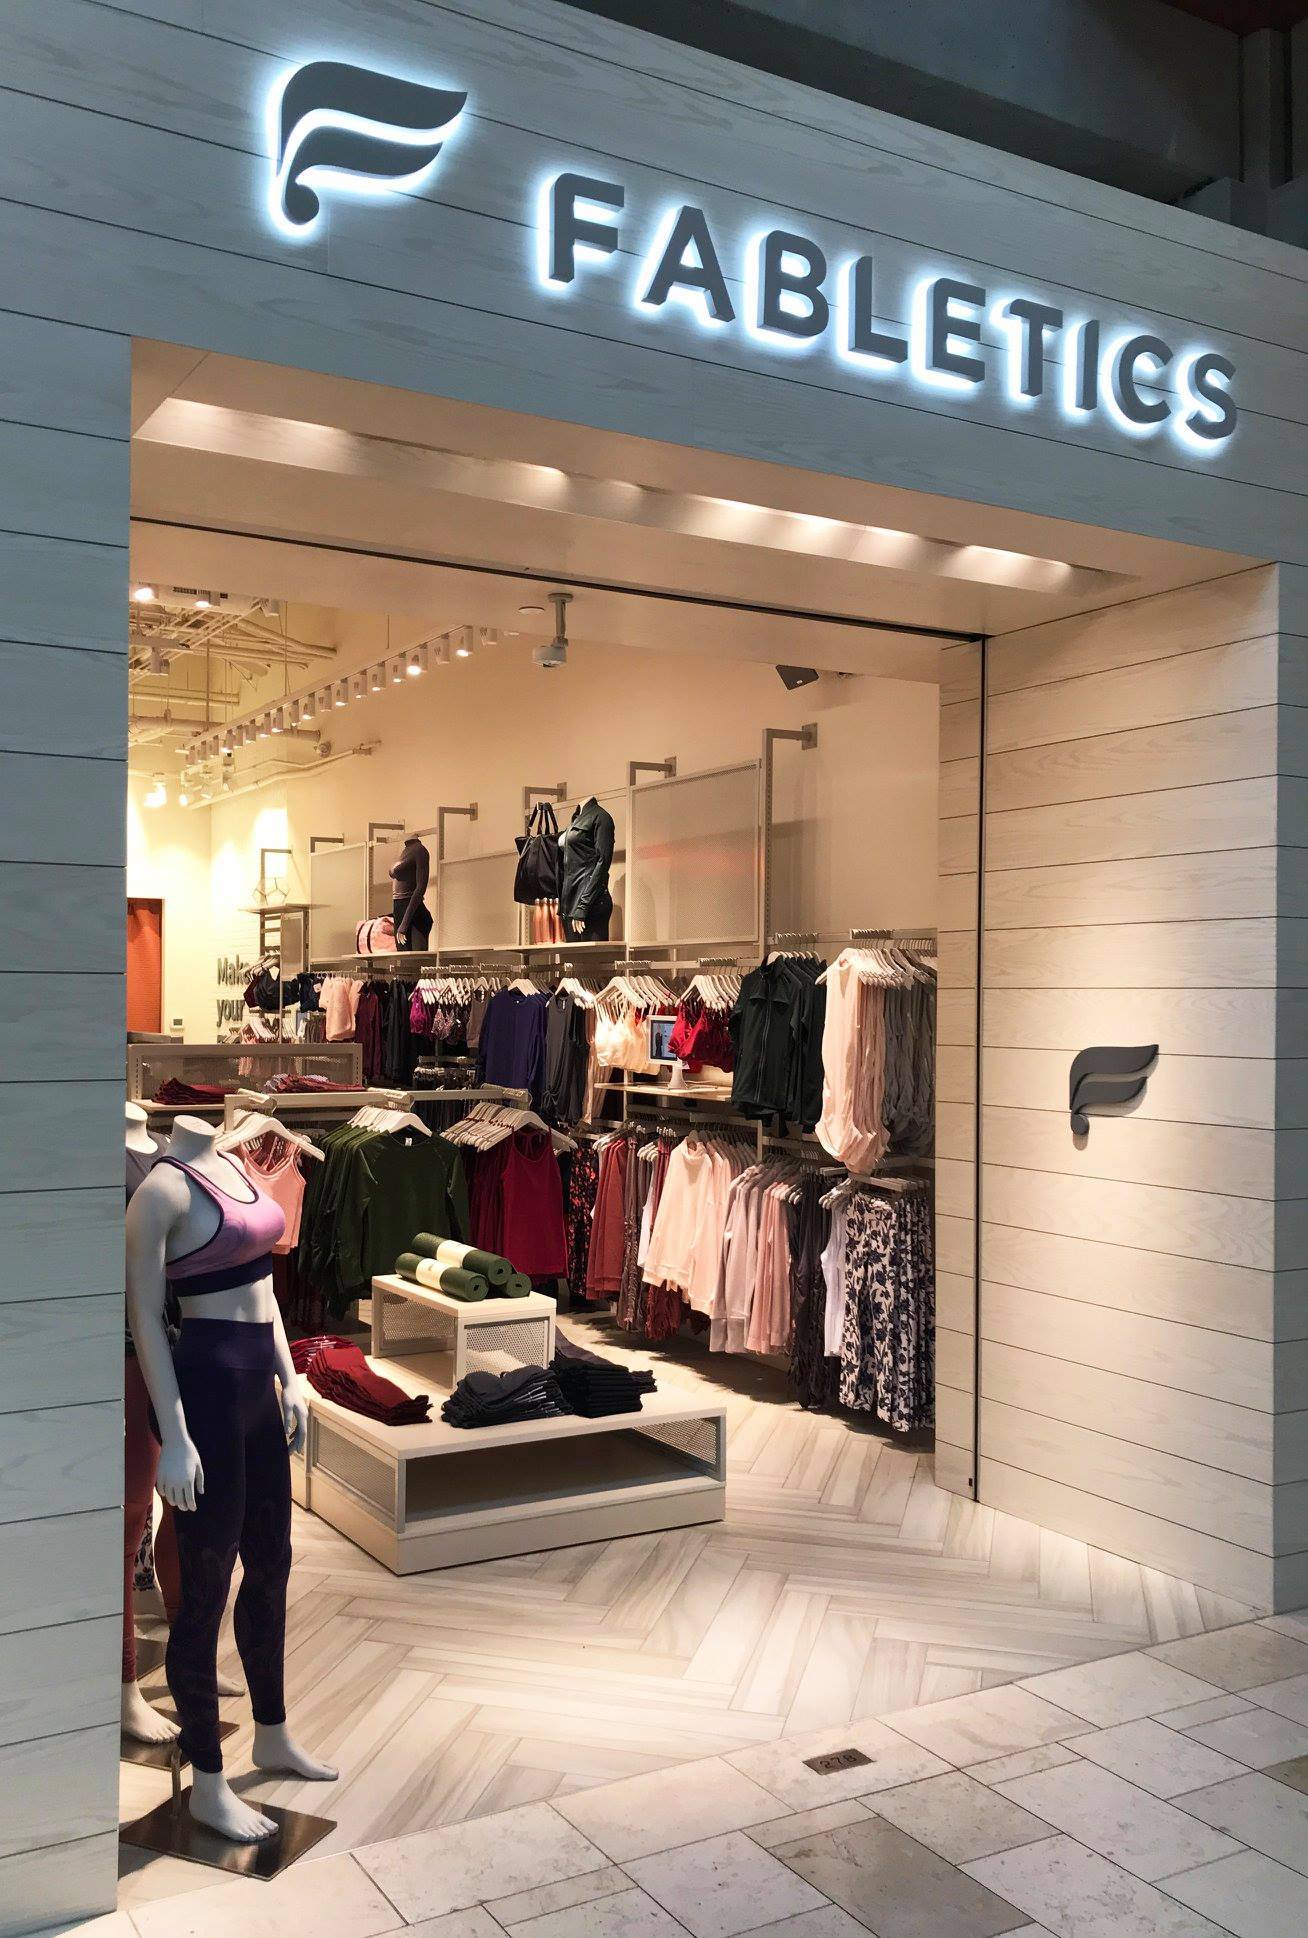 Fabletics has 25 locations in North America. In Florida it has stores in Boca Raton, Sarasota and Tampa.